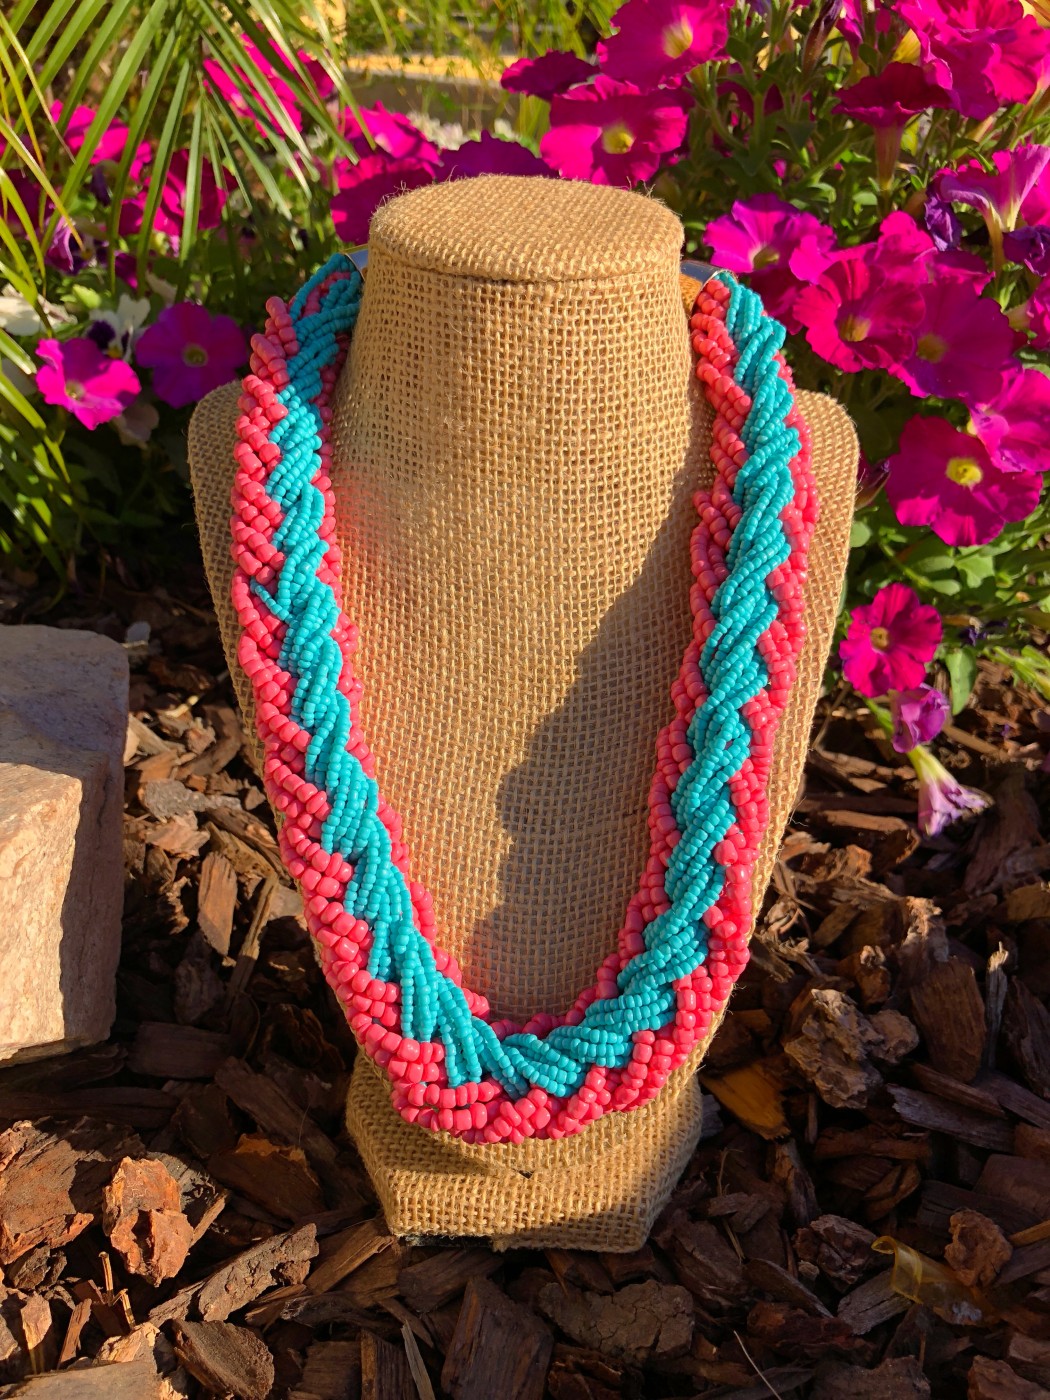 Handcrafted Southwestern Peyote with a Twist Beaded Necklace | aftcra